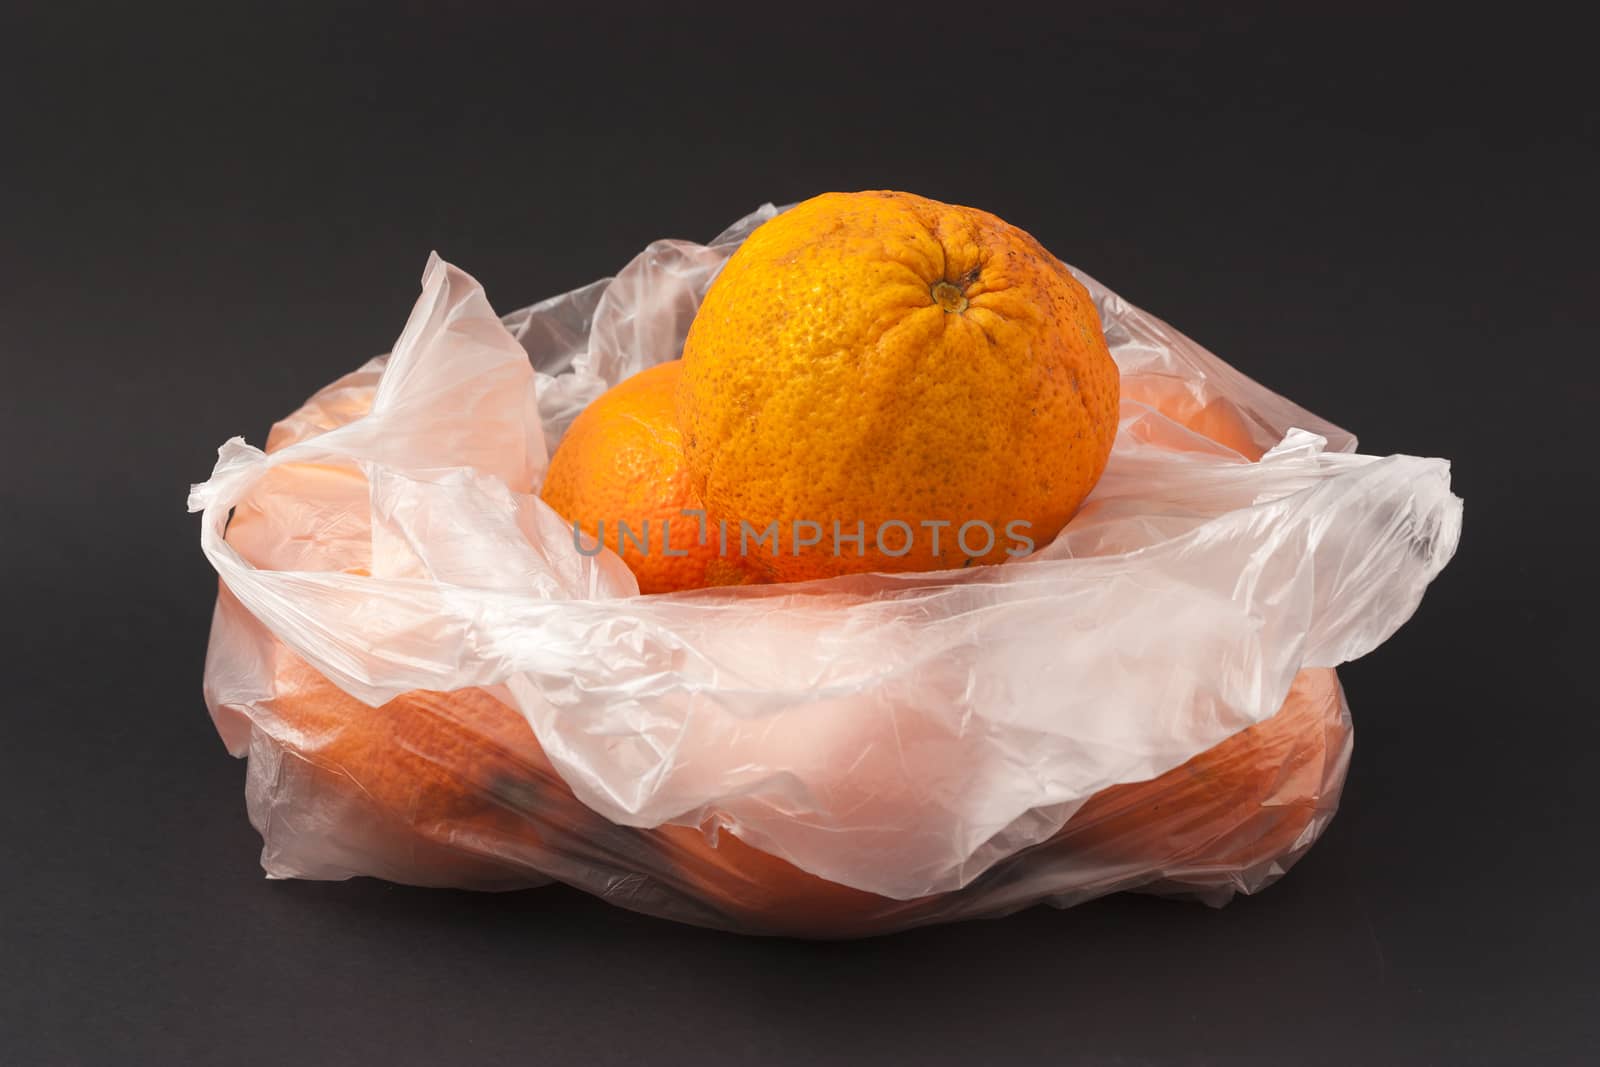 Oranges in a white envelope on a black background by mailos